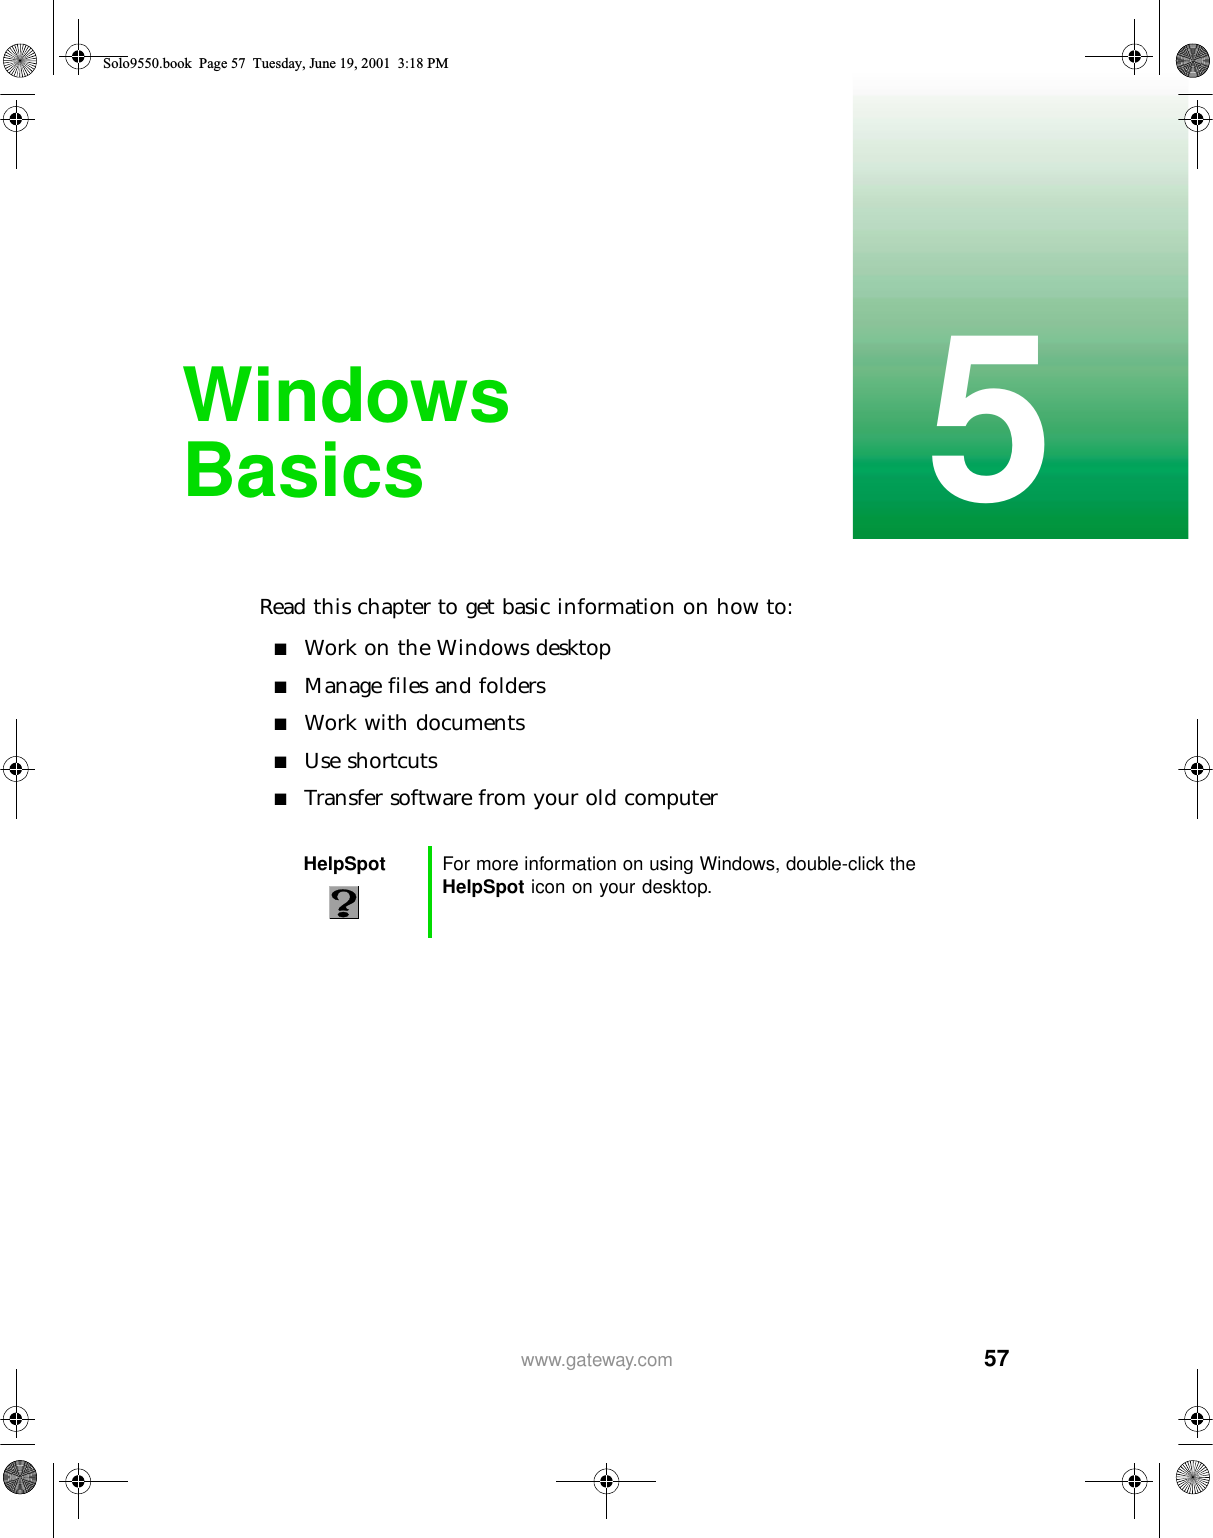 575www.gateway.comWindows BasicsRead this chapter to get basic information on how to:■Work on the Windows desktop■Manage files and folders■Work with documents■Use shortcuts■Transfer software from your old computerHelpSpot For more information on using Windows, double-click the HelpSpot icon on your desktop.Solo9550.book Page 57 Tuesday, June 19, 2001 3:18 PM